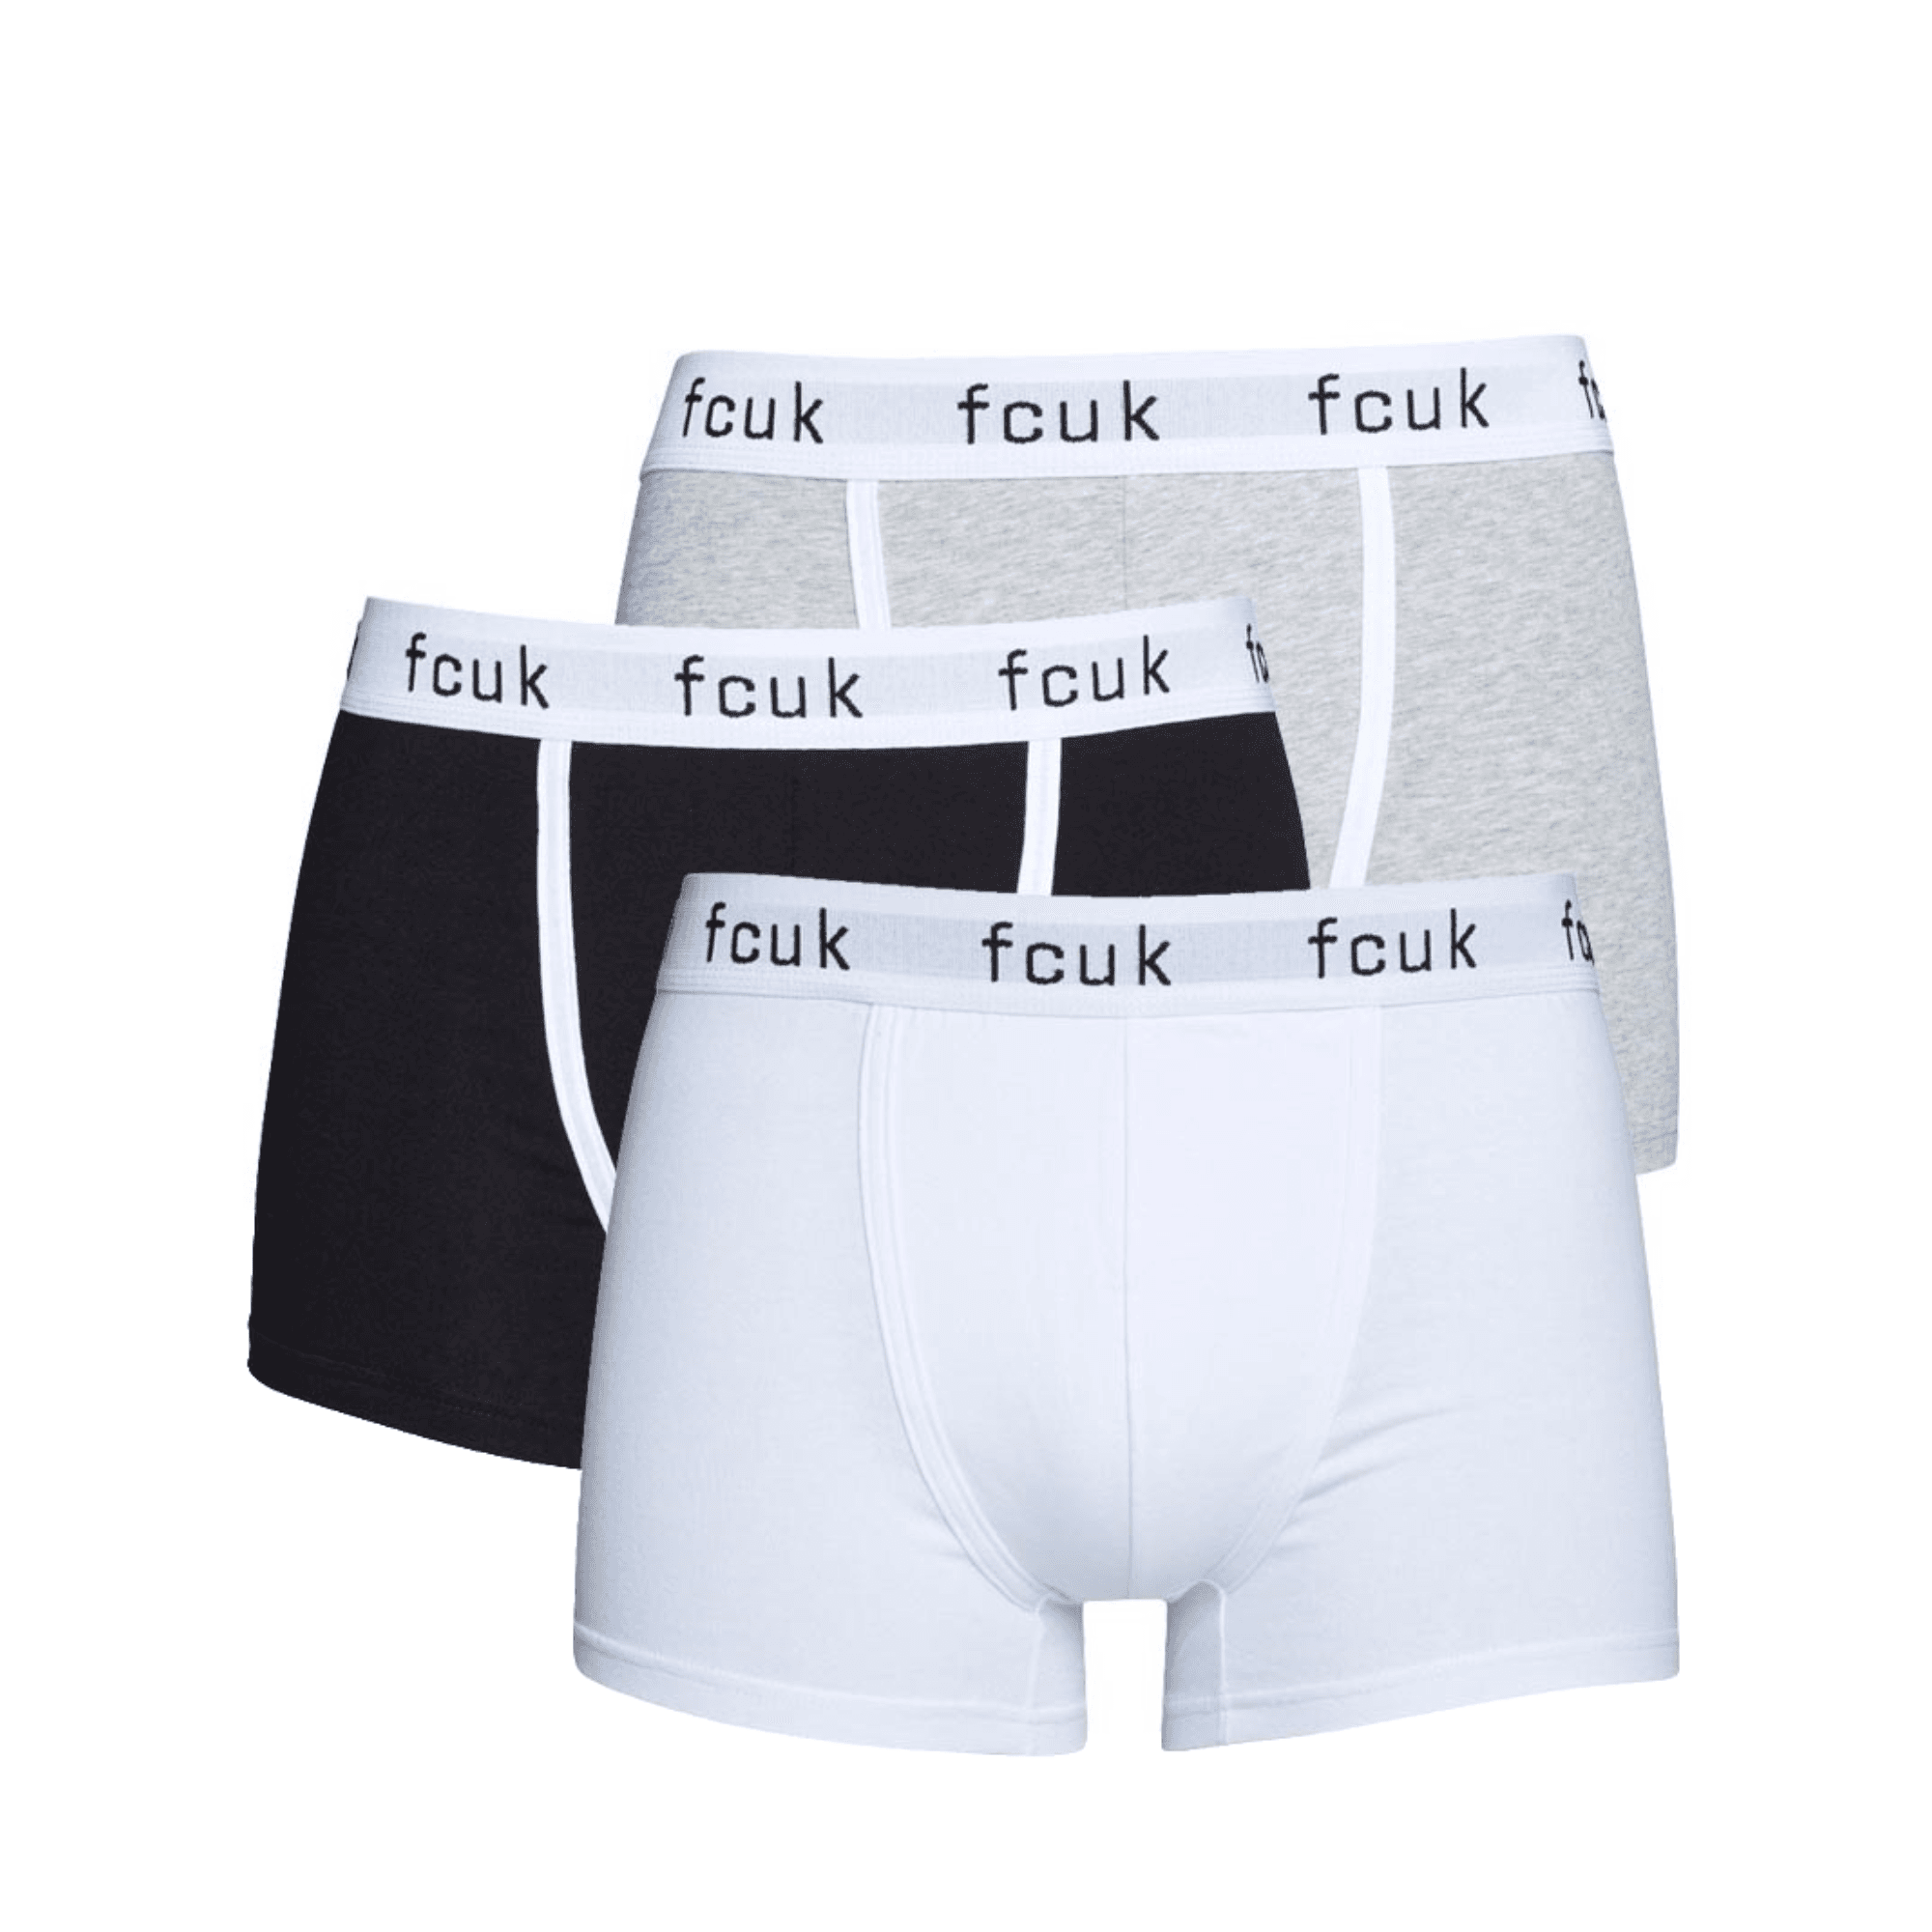 FCUK 3 Pack Men's Boxers - Small